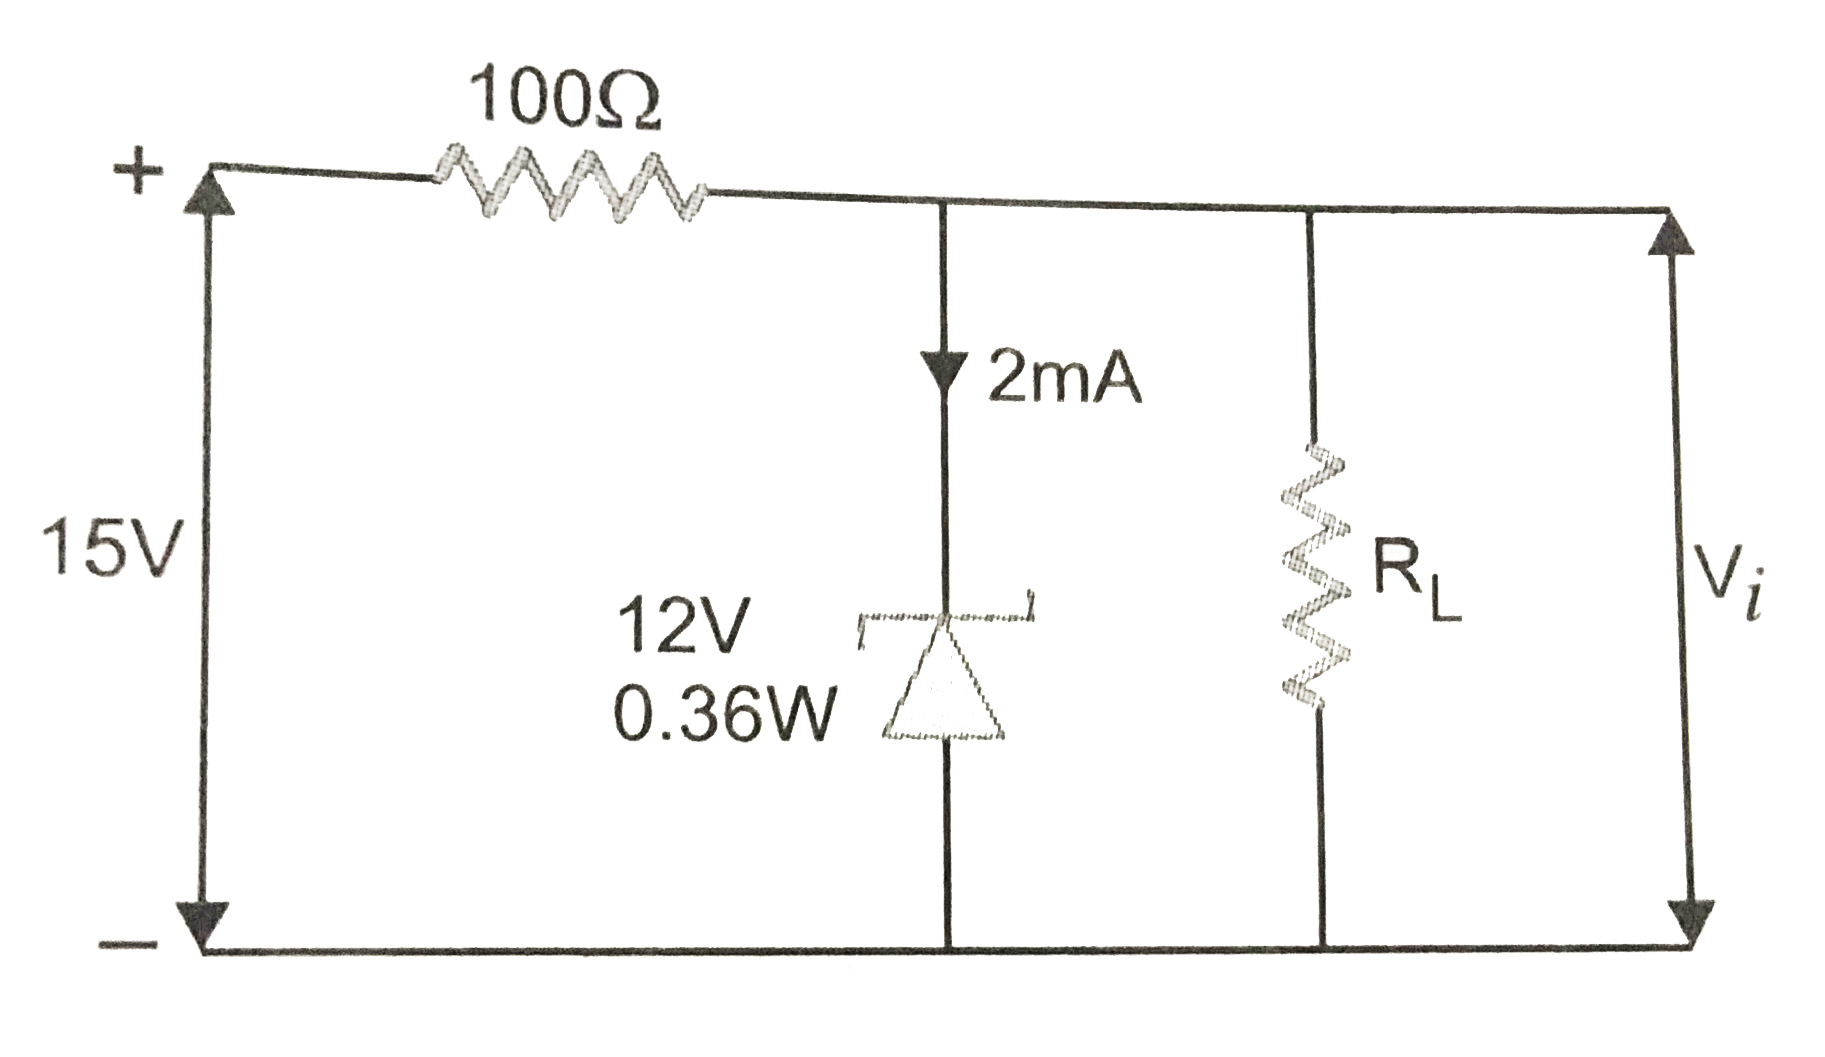 In the circuit Fig., what is the range over which the load resistance can be varied?